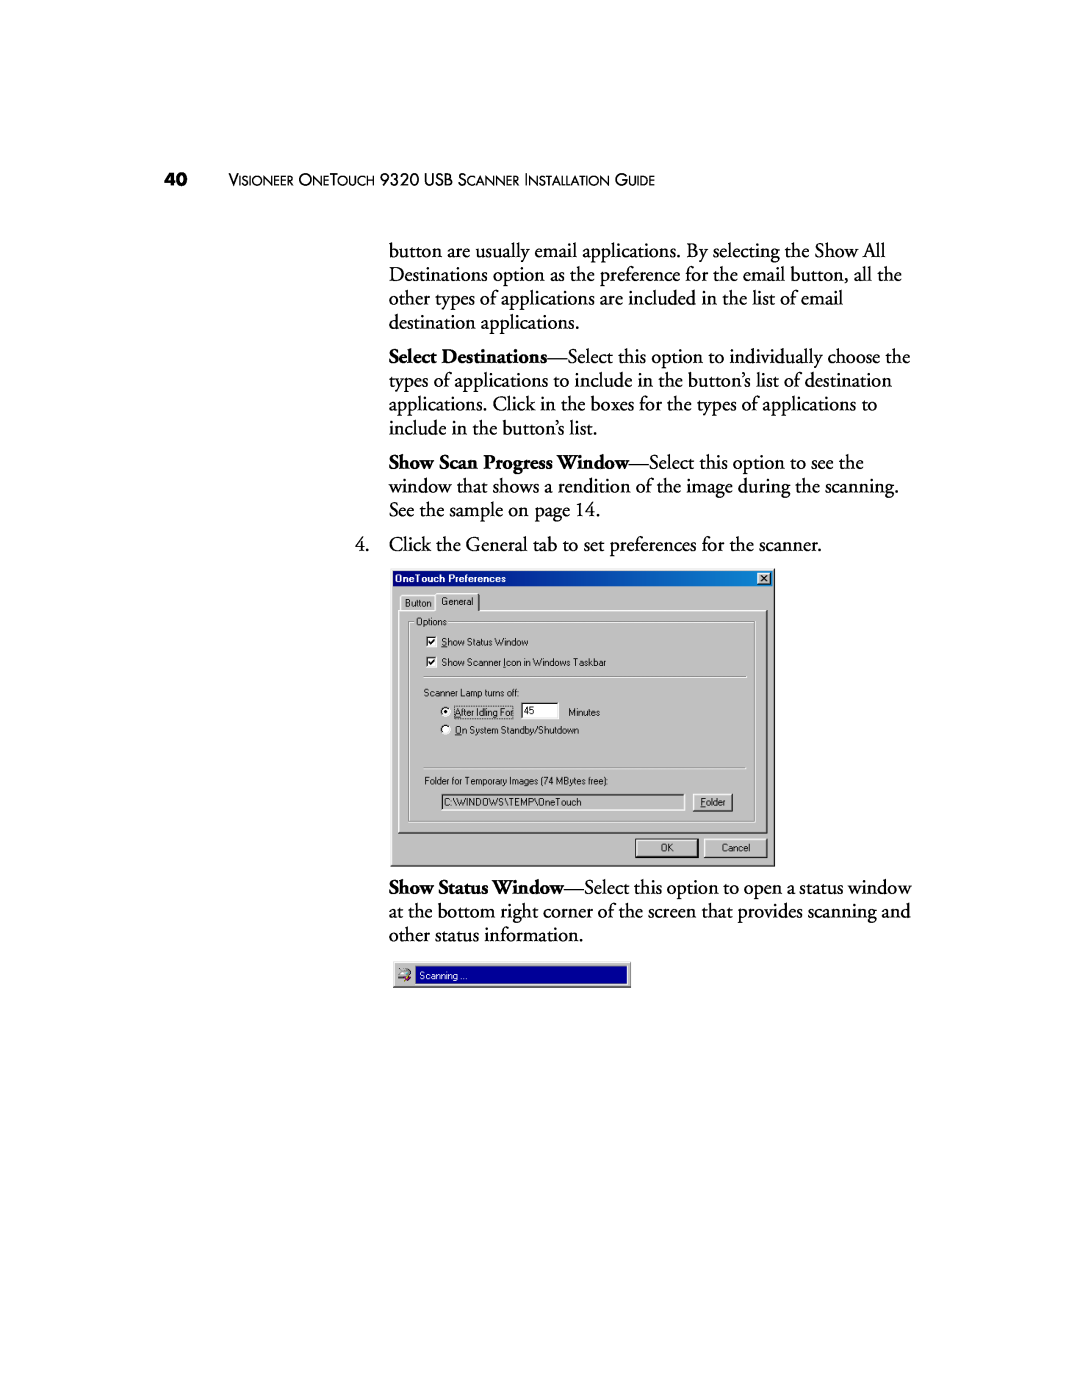 Visioneer 9320 manual Click the General tab to set preferences for the scanner 